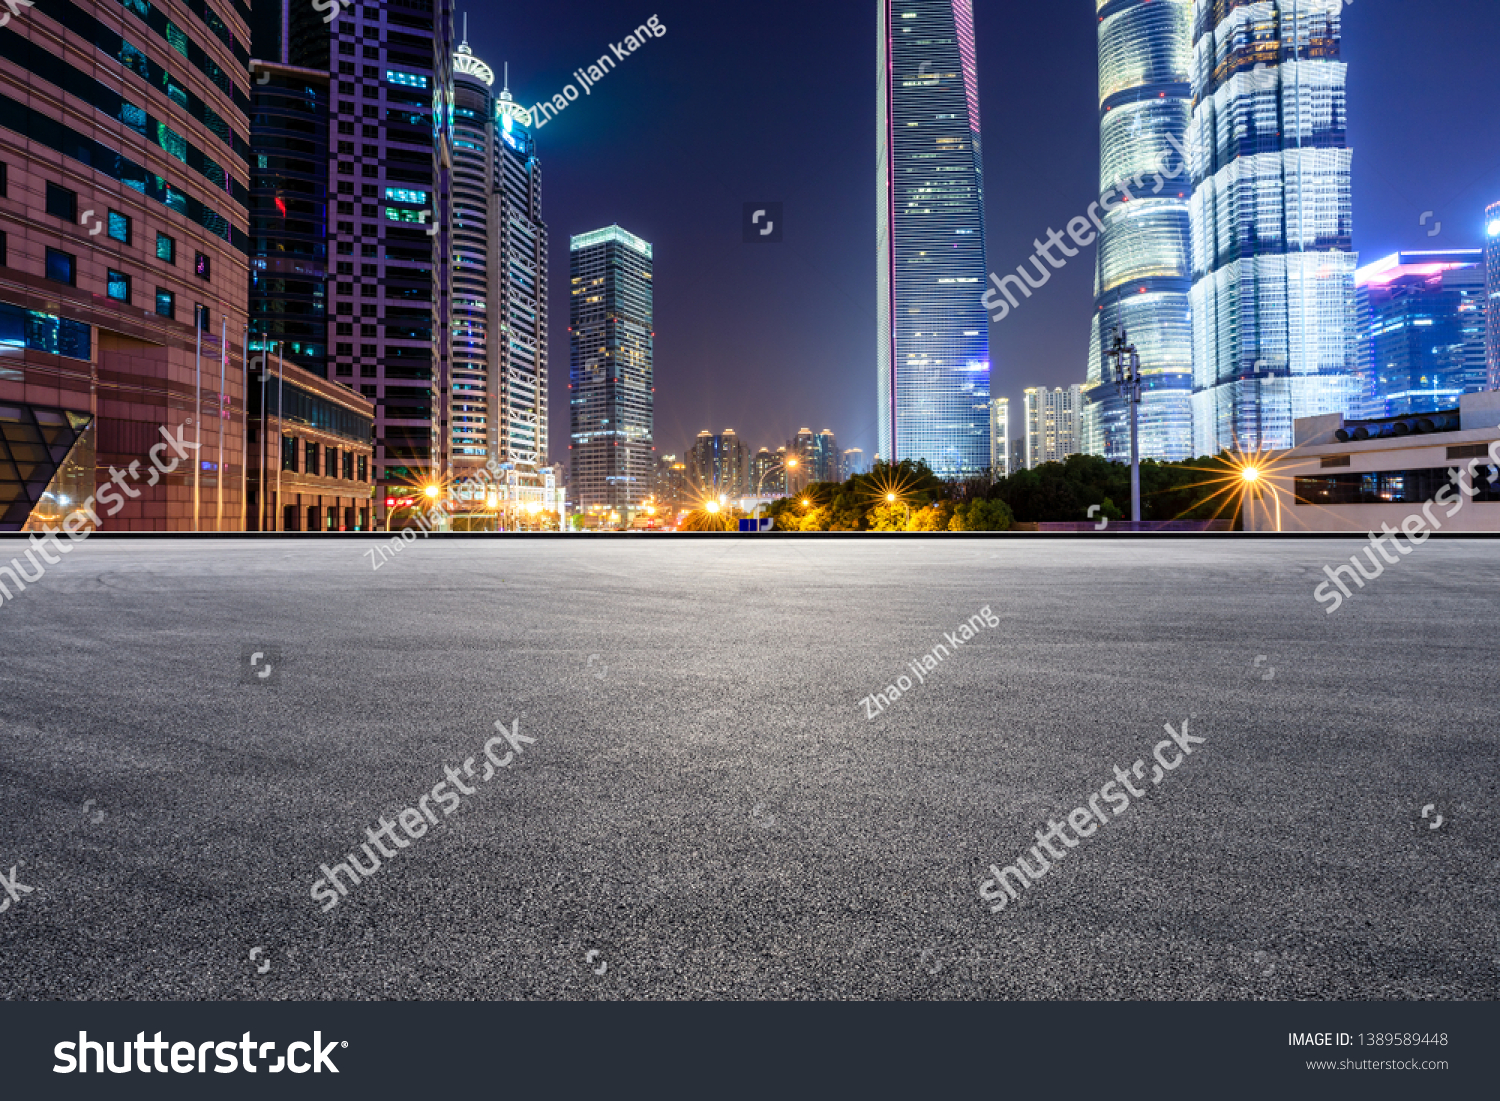 Asphalt race track and modern skyline and buildings in Shanghai at night #1389589448